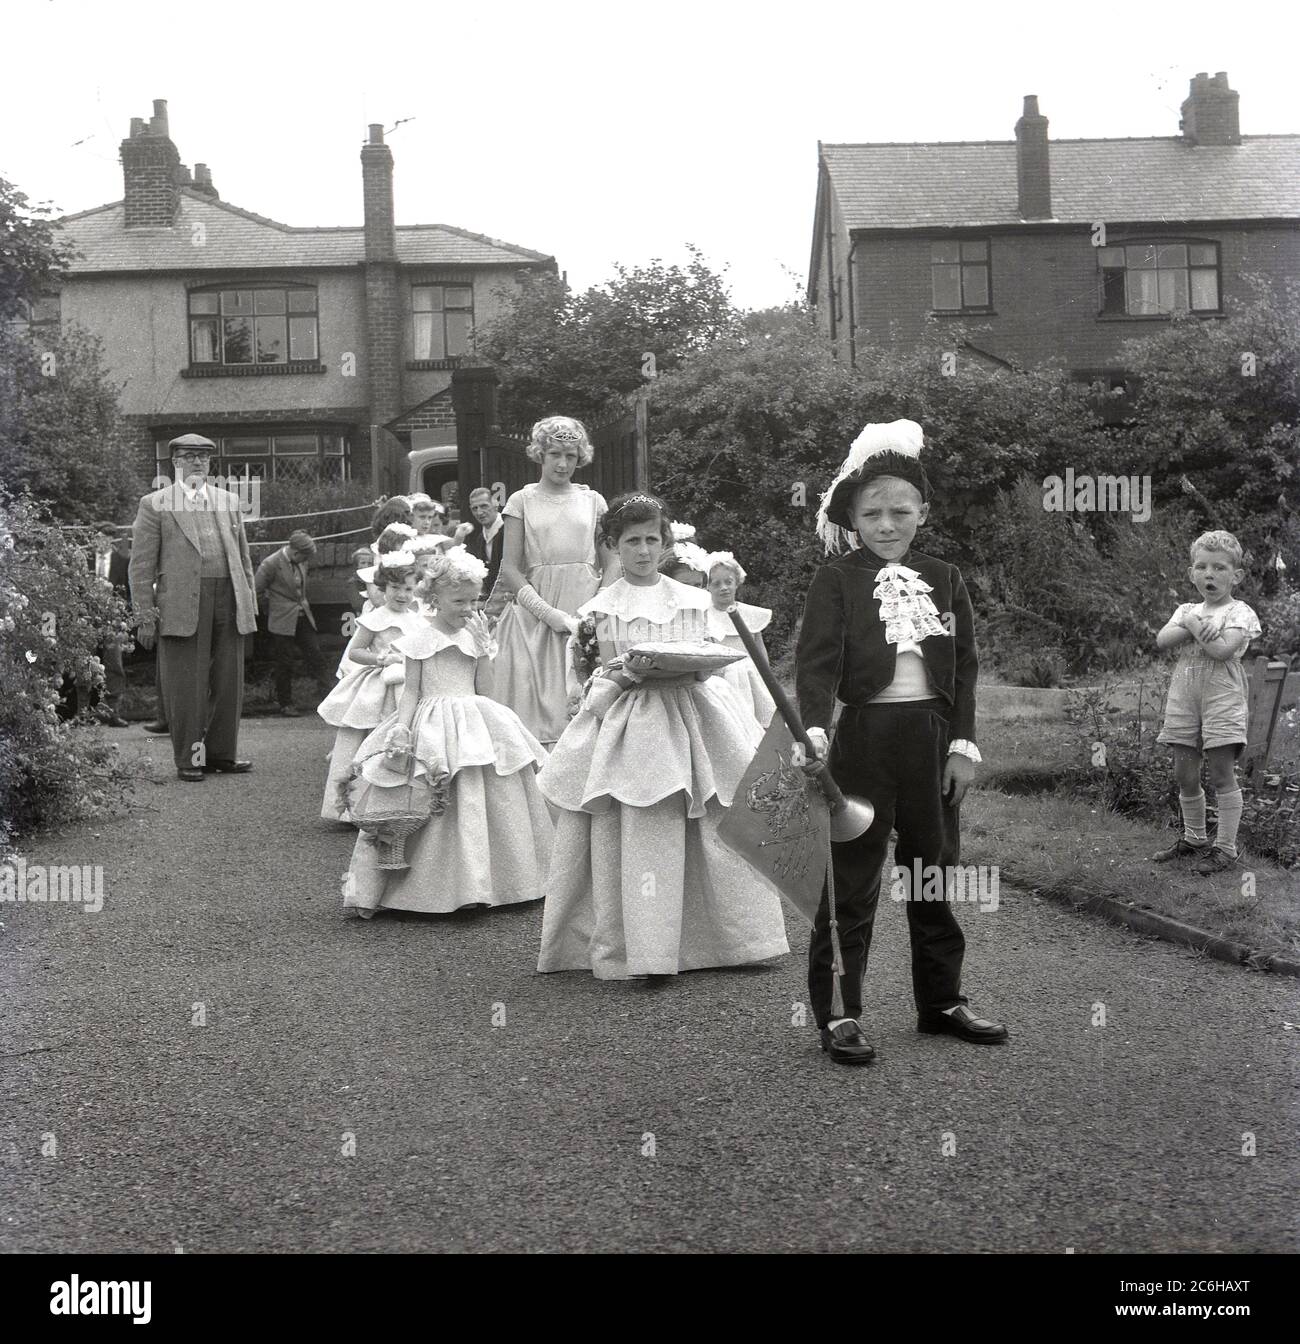 1950s, historical, the Rose Queen, a local teeage girl, with other young girls in their costumes walking in a procession led by a young boy dressed in a regency outfit and carrying a trumpet at Farnworth, Bolton, Lancashire, England, UK. Dating back to the 1880s, the annual Rose Queen festival, held in June, became a major annual event in many towns and villages across the UK, especially in Lancashire, known as the red rose county, following the 1455-87 Wars of the Roses. Stock Photo